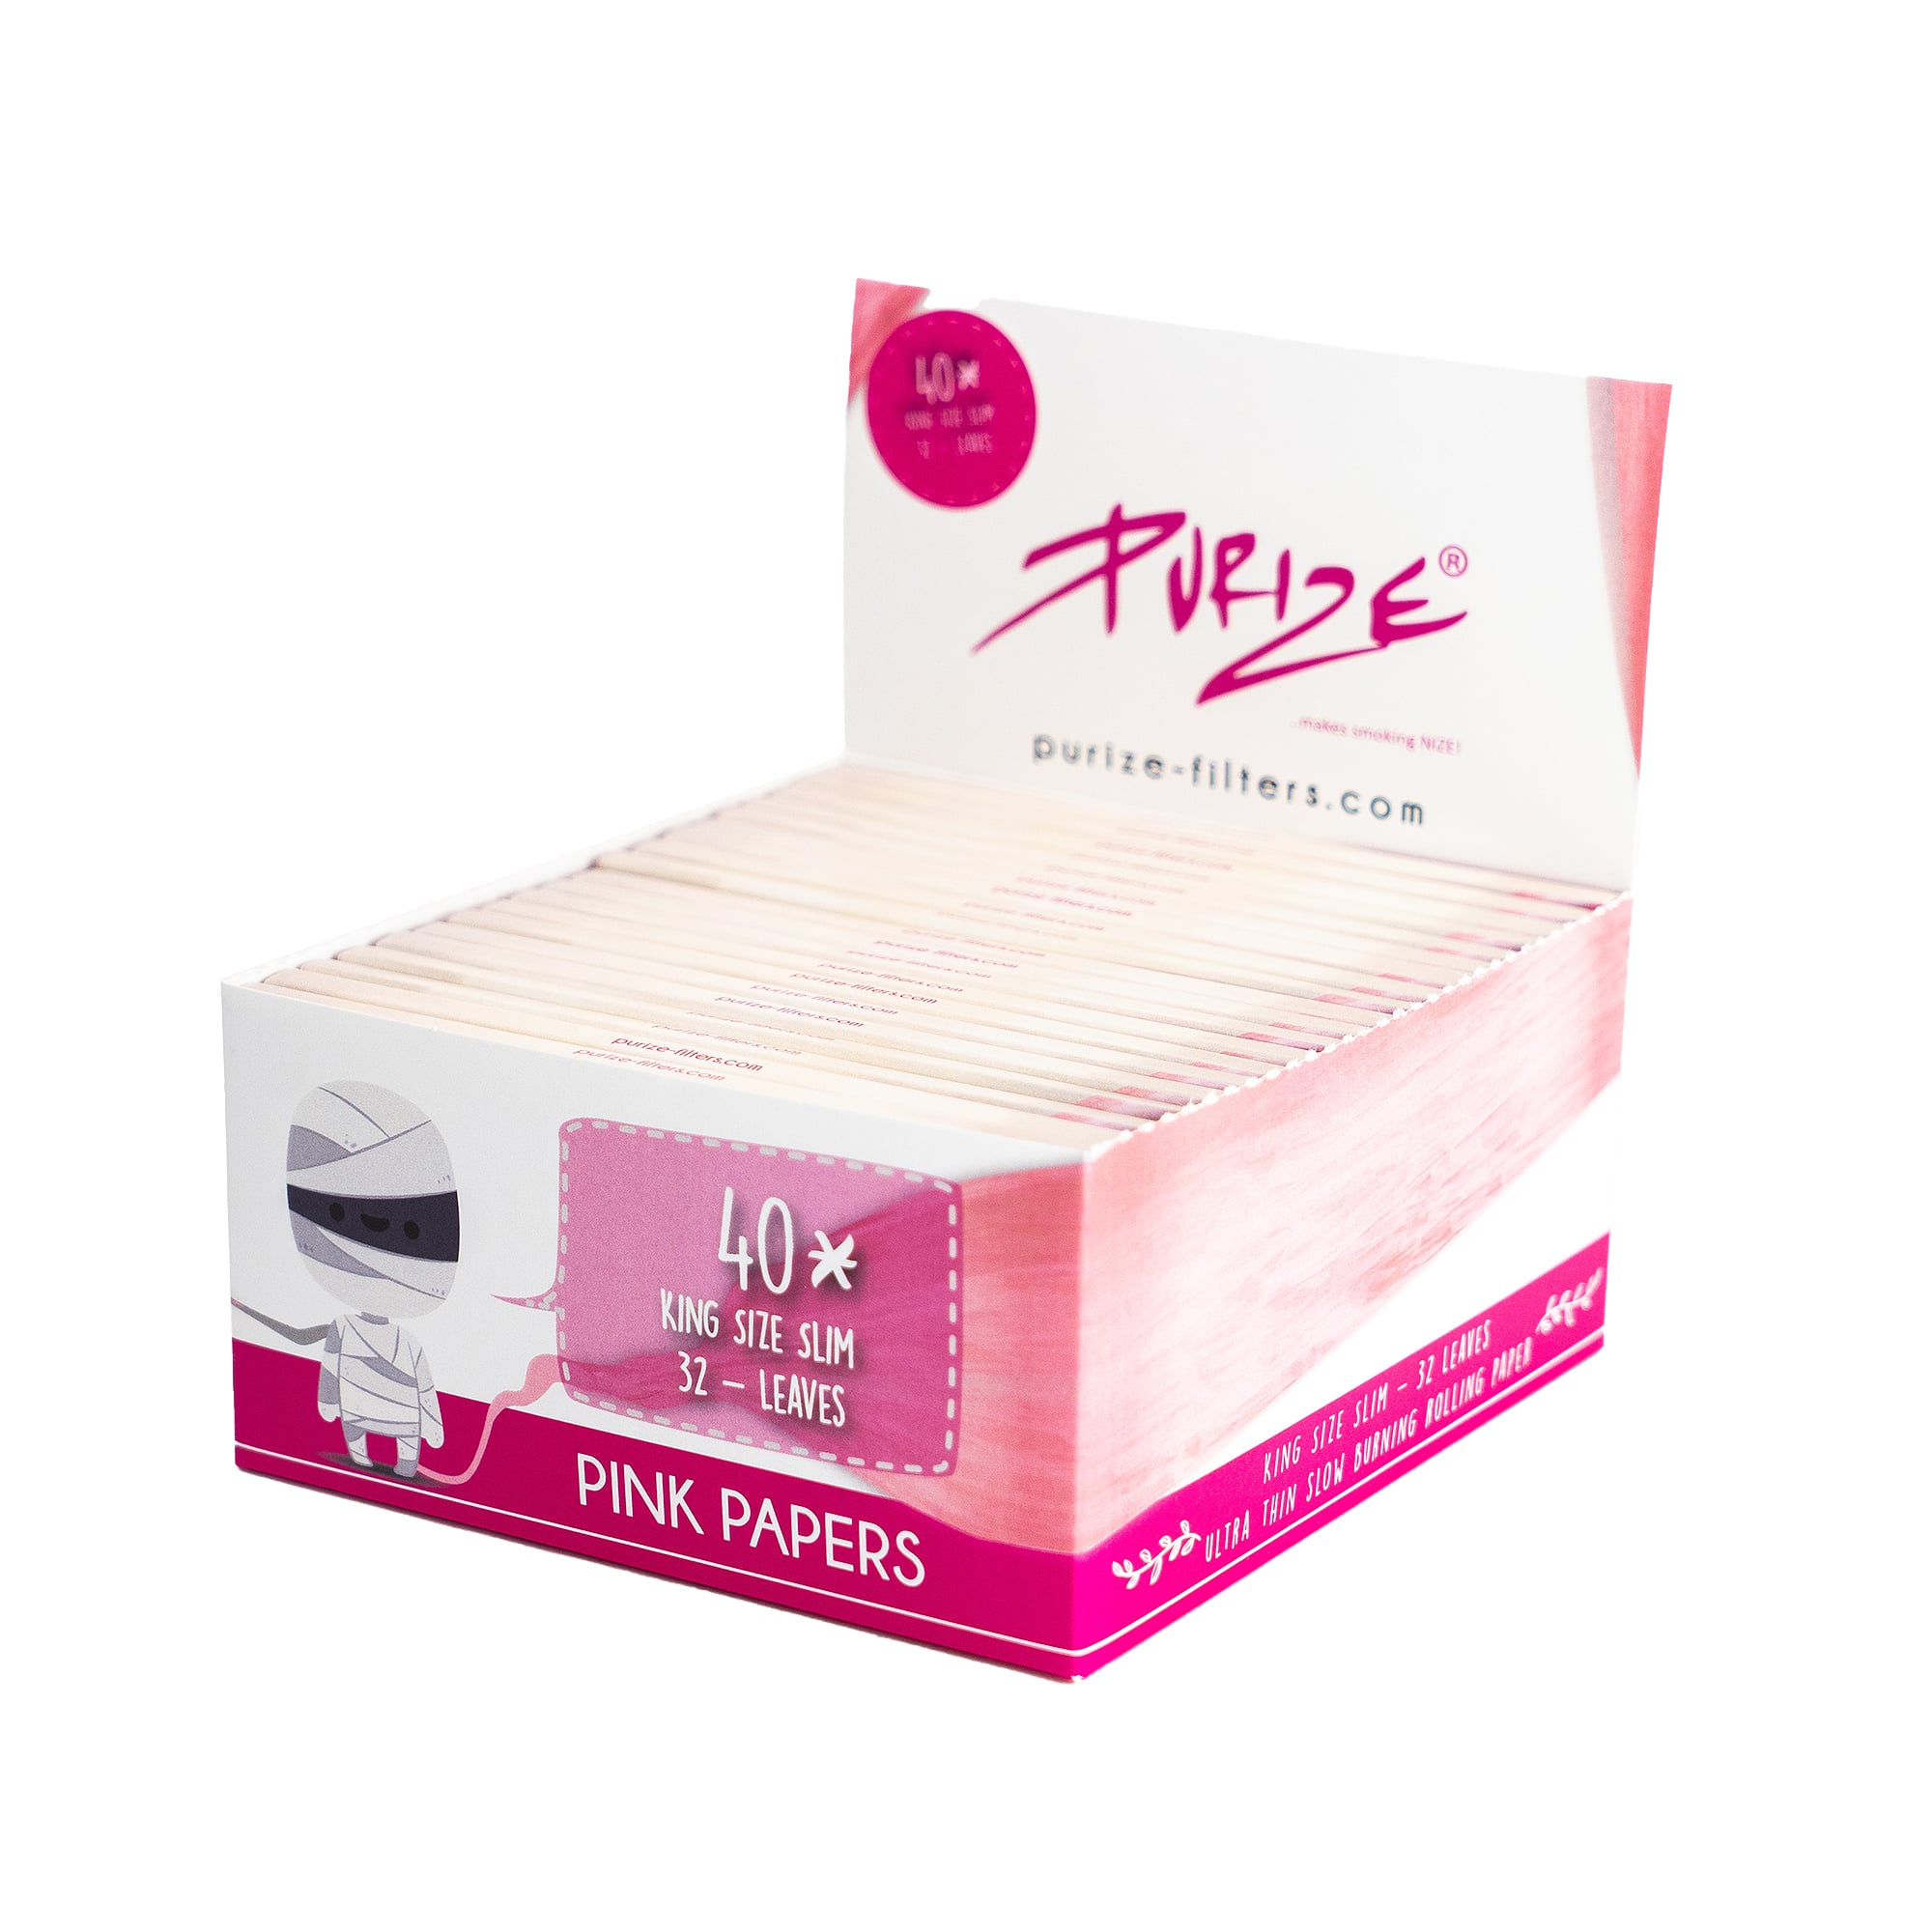 PURIZE® Pink Papers I KSS I 40 Pack